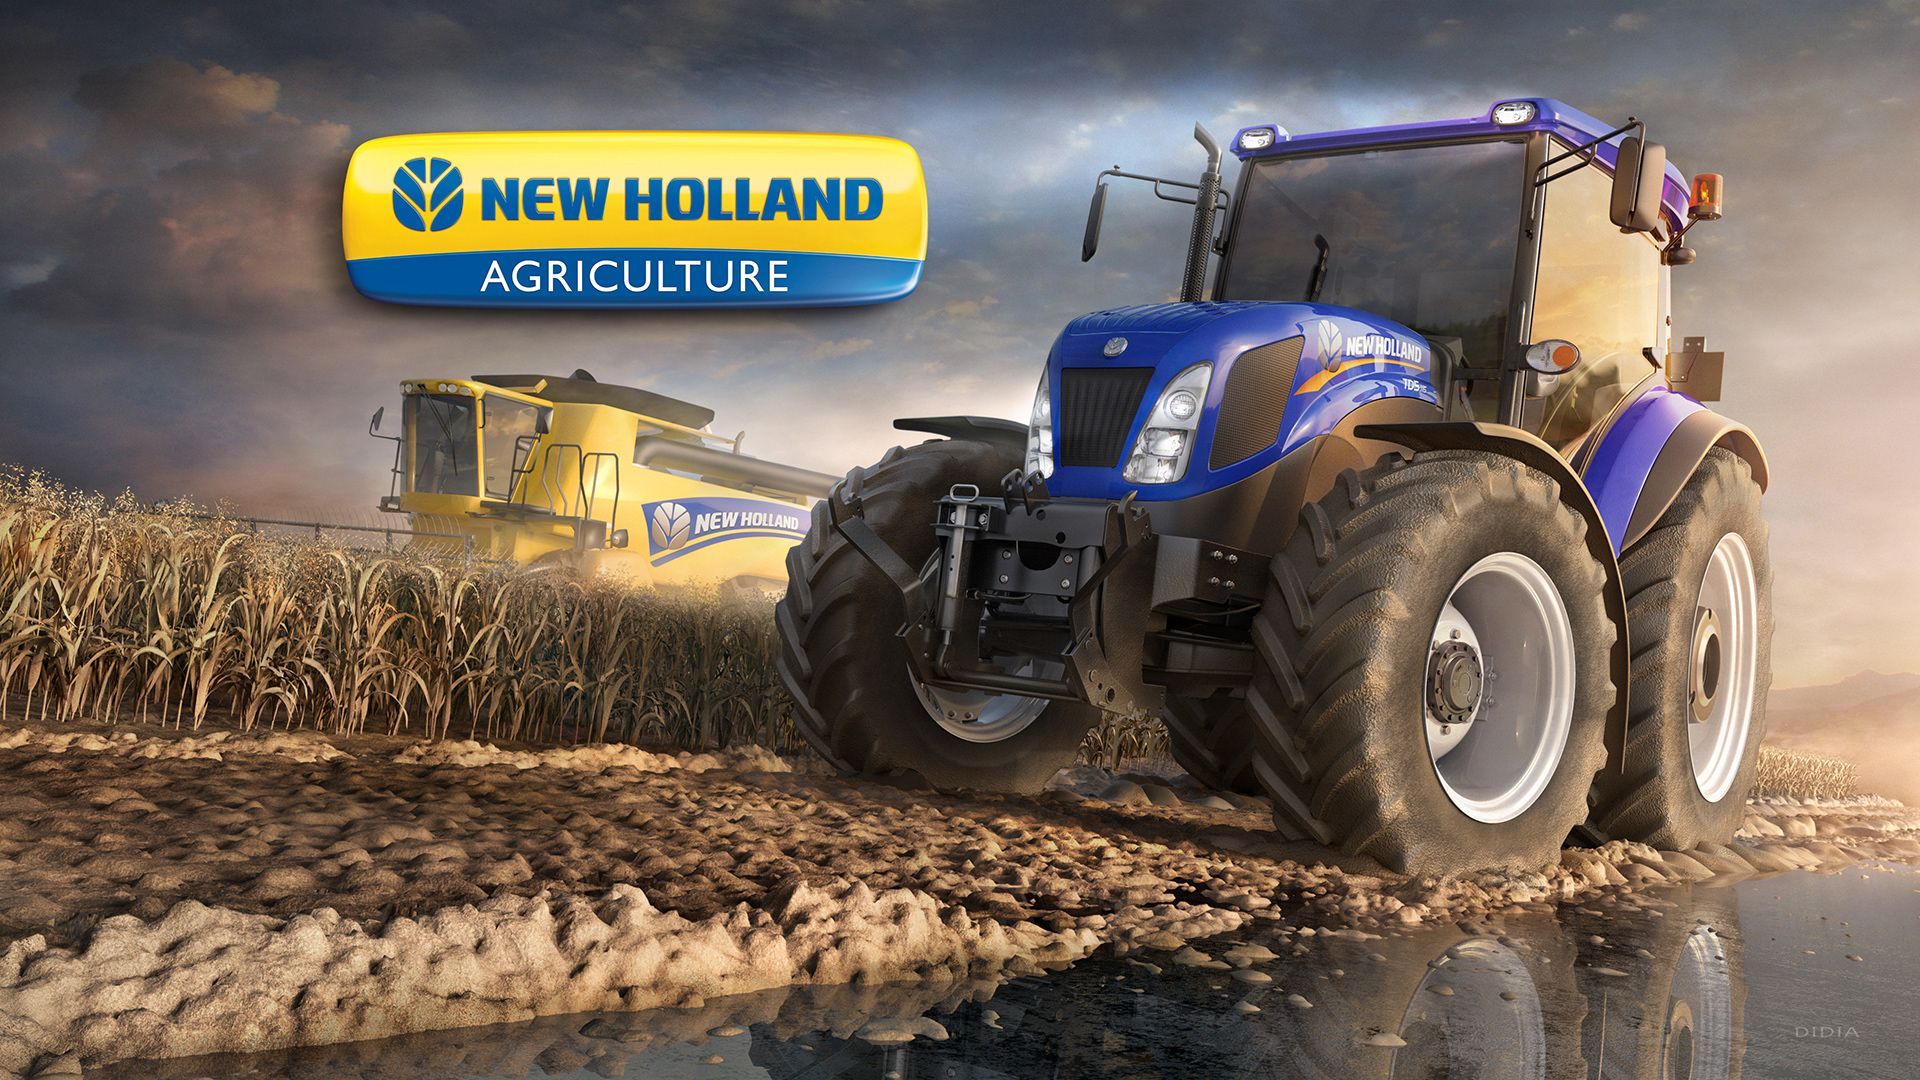 New Holland Wallpaper Free New Holland Background